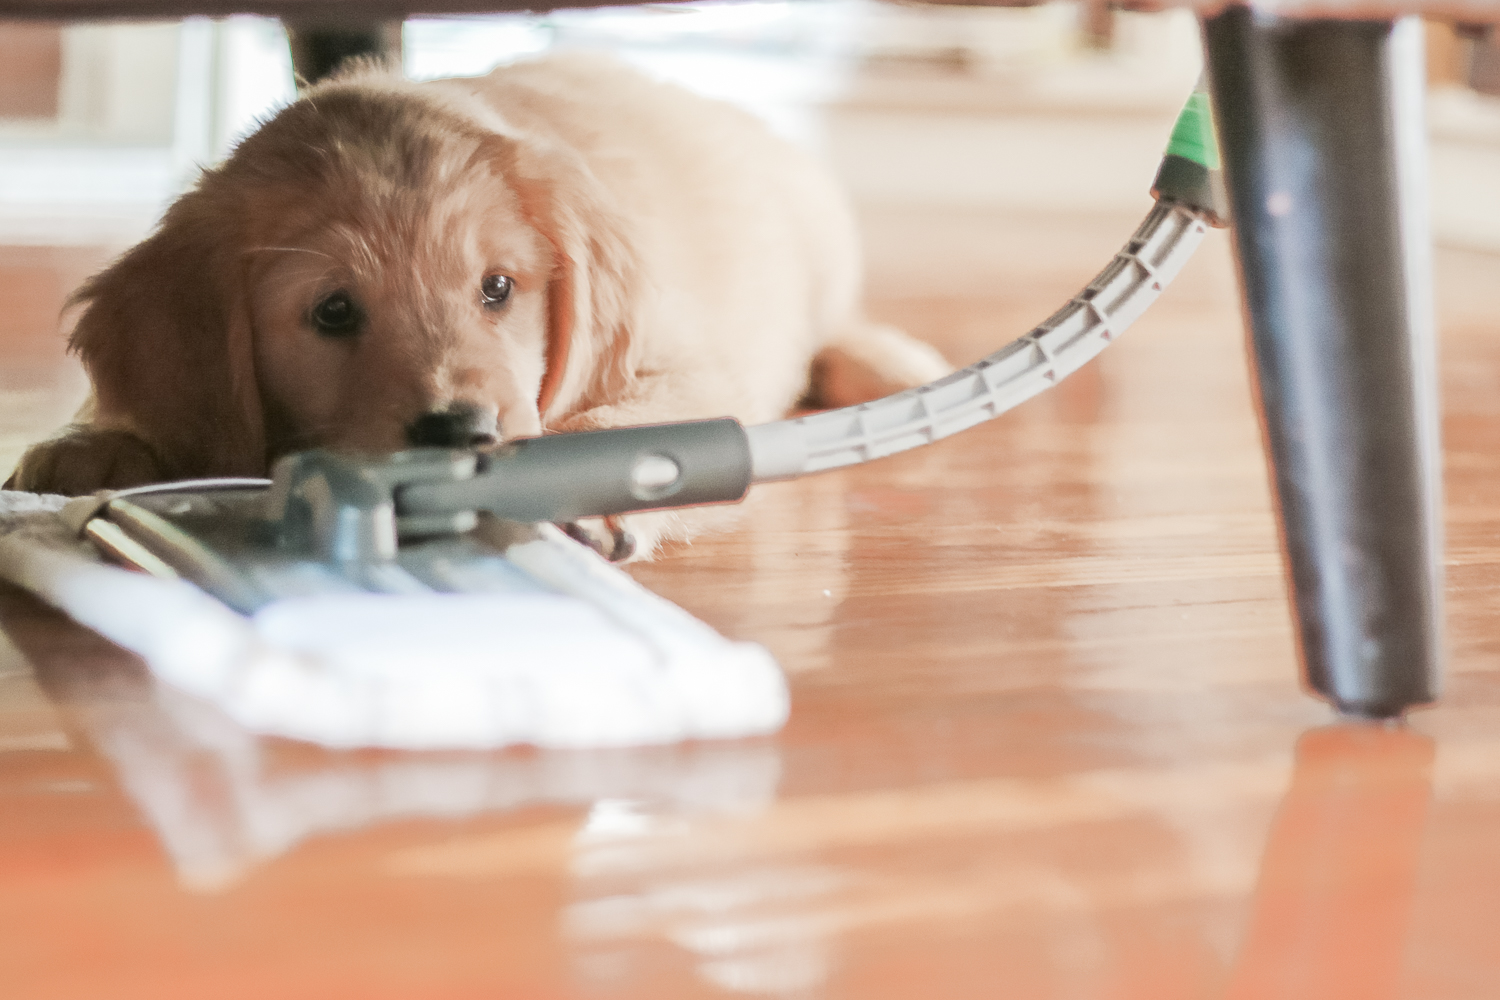 Clean Hardwood Floors With Pets, Best Way To Clean Hardwood Floors With Pets